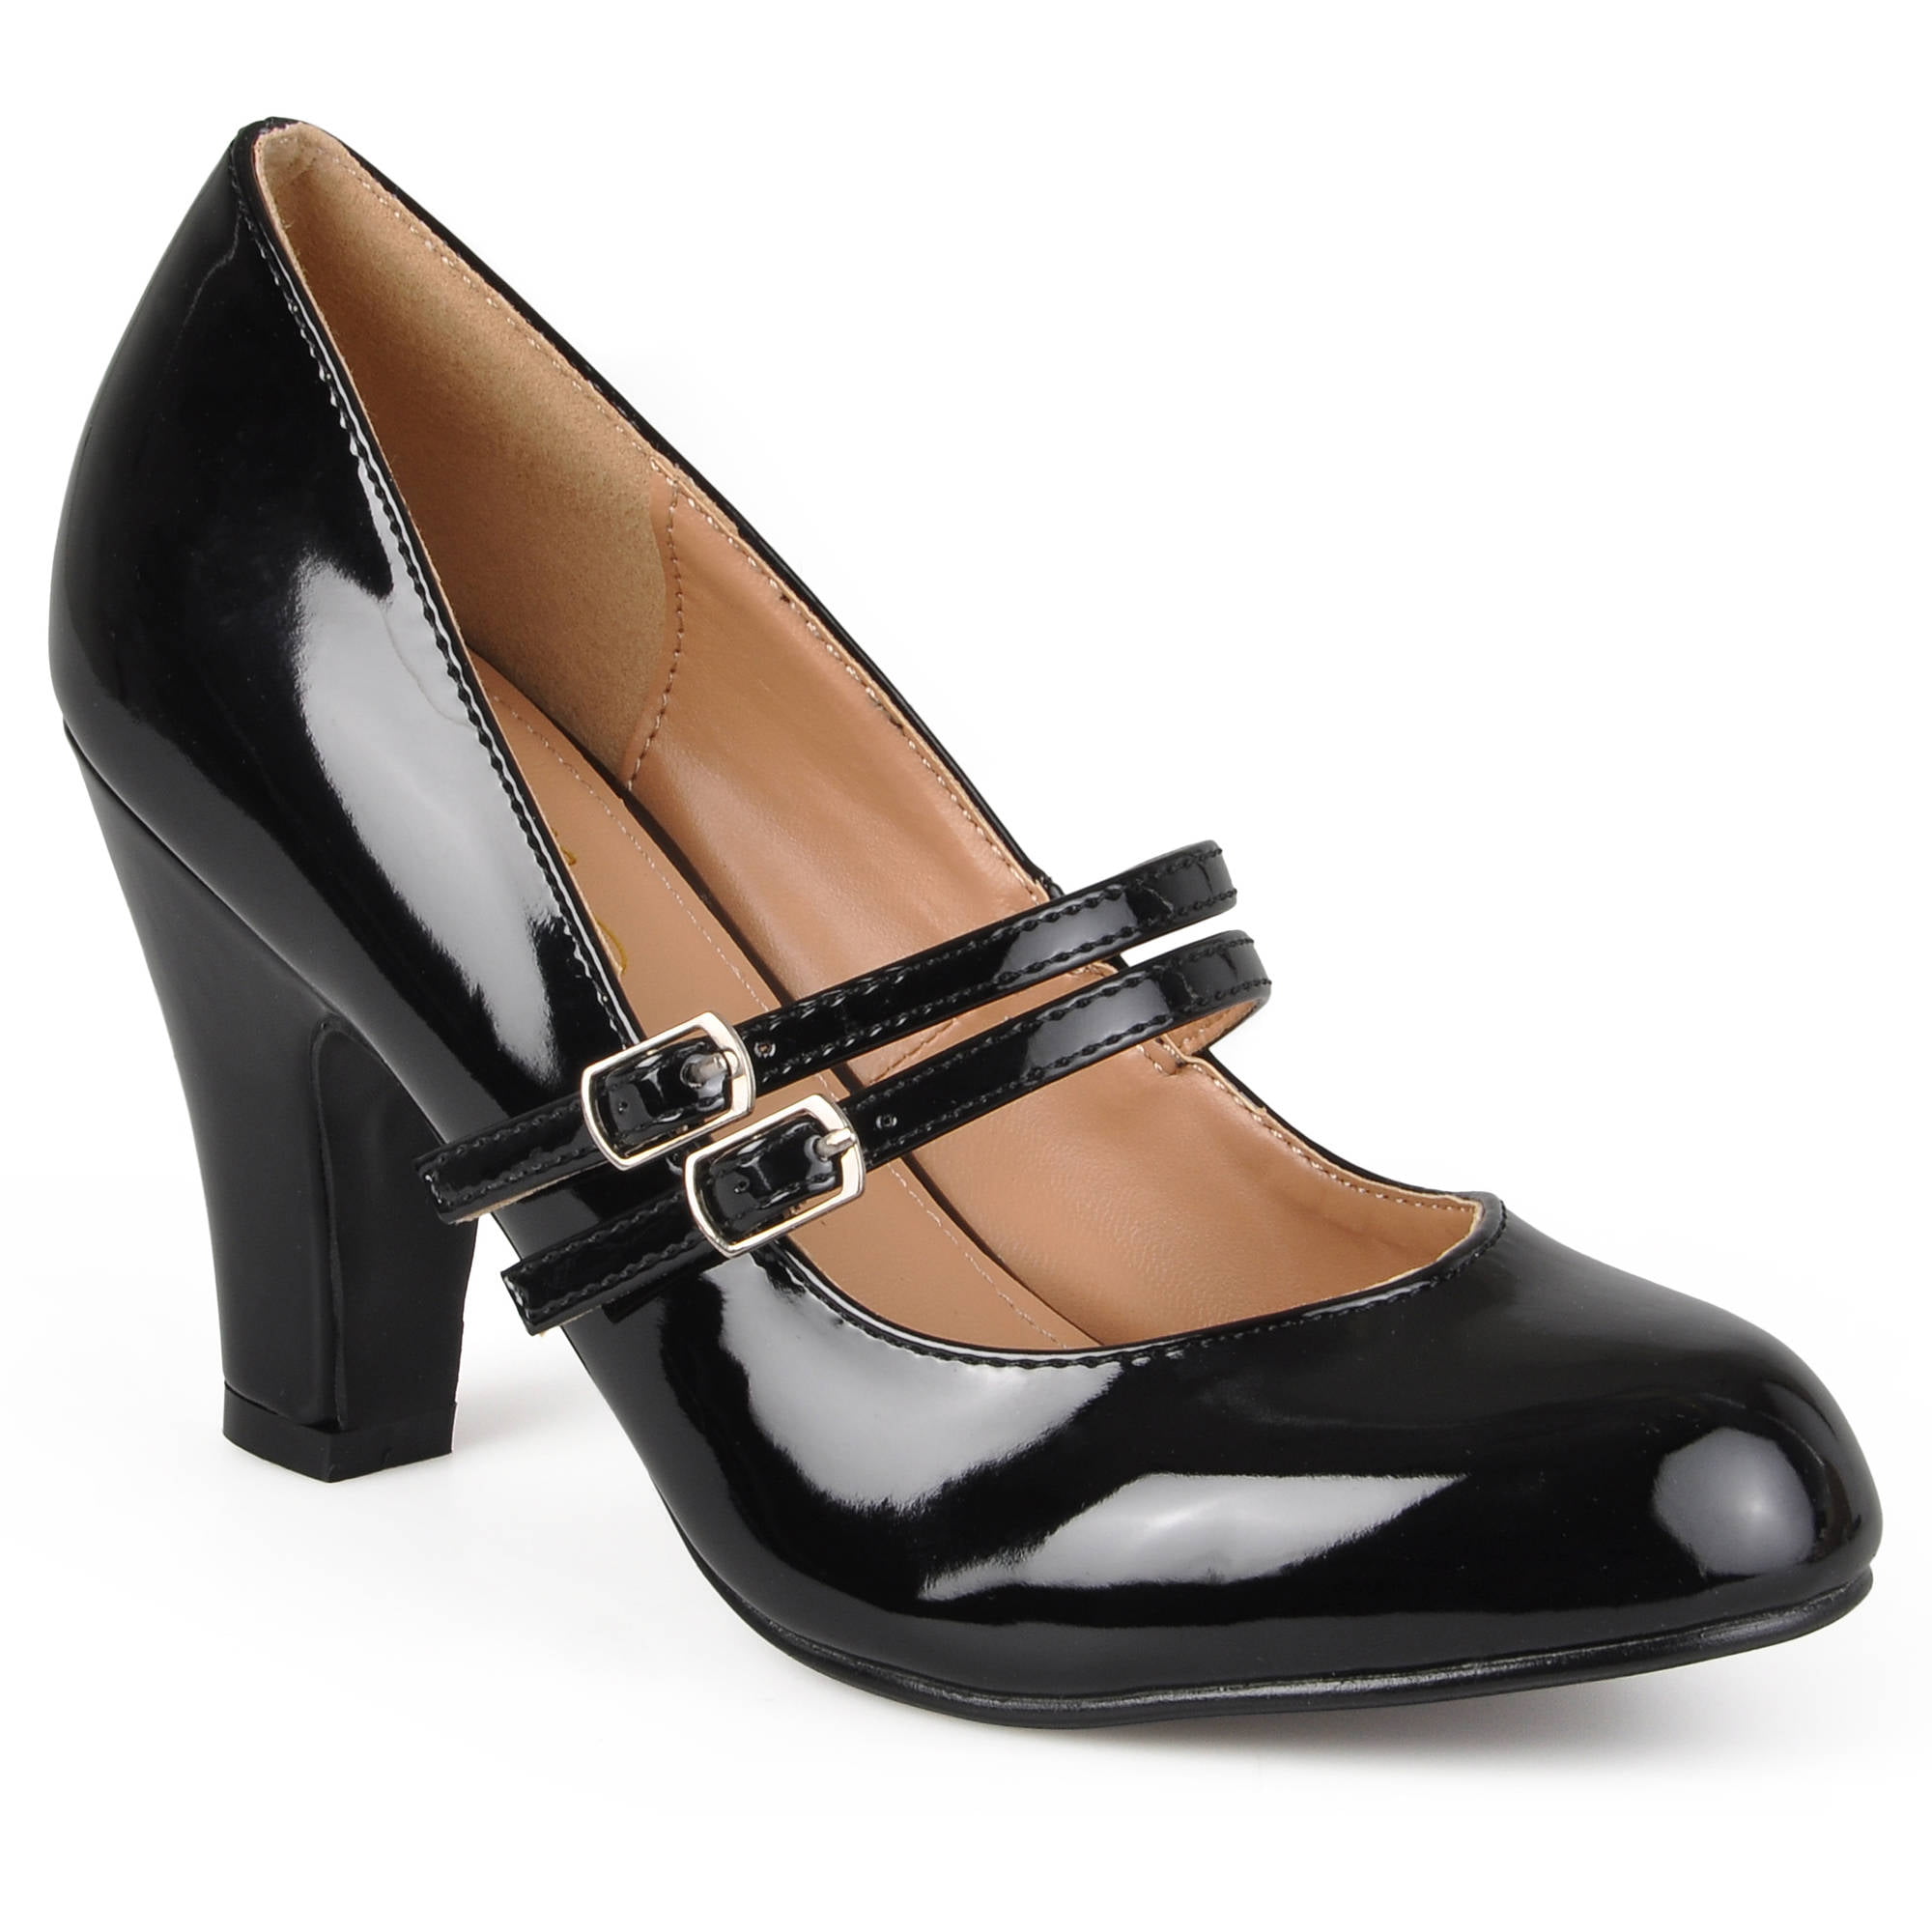 Details about   Women Casual Patent Leather Mary Janes Solid Ankle Strap Pumps Shoes 46 47 48 D 